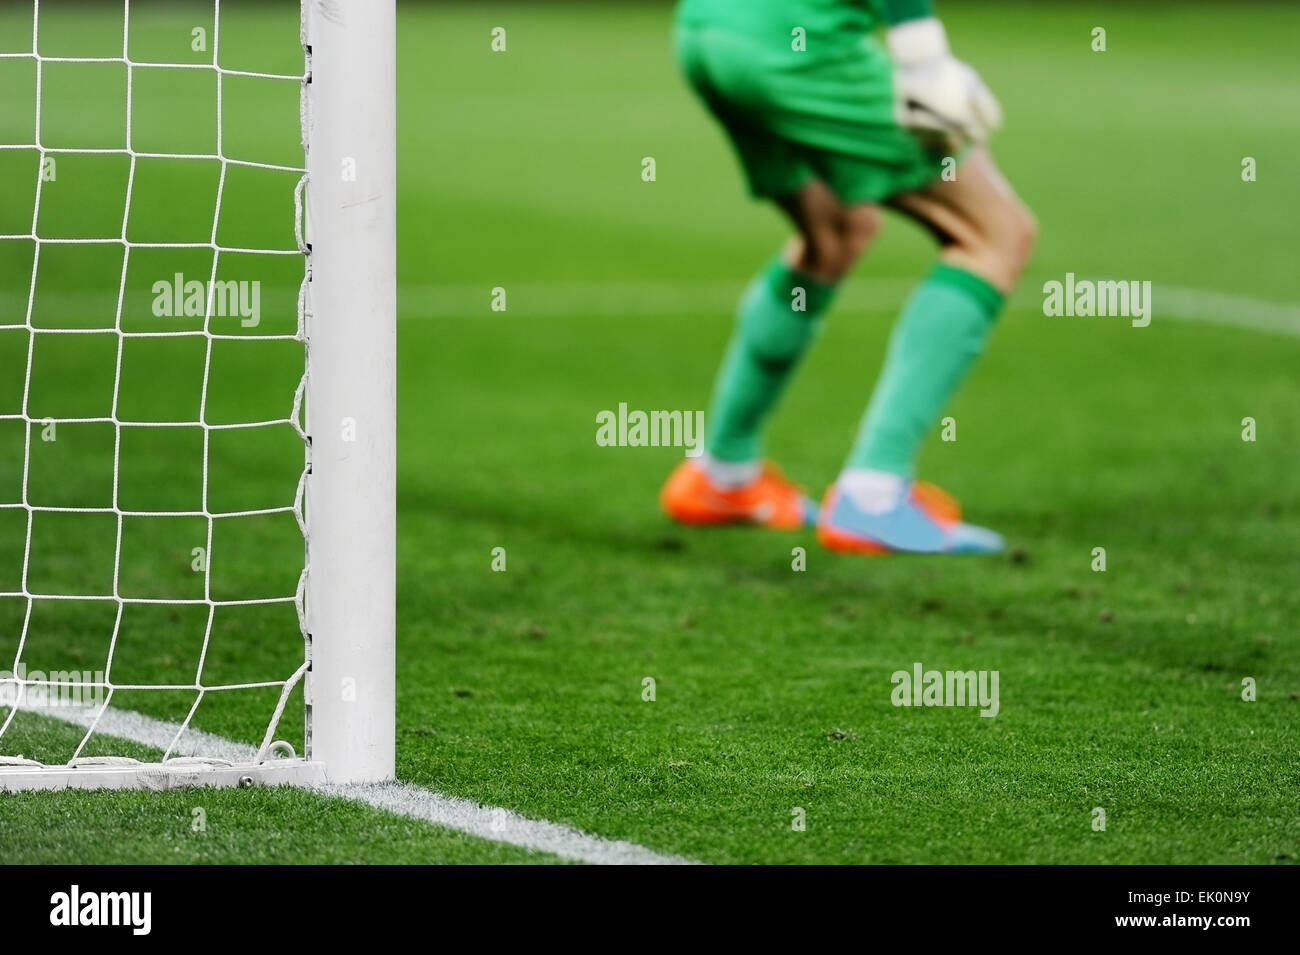 Soccer goal detail with goalkeeper preparing for a penalty kick in the background Stock Photo